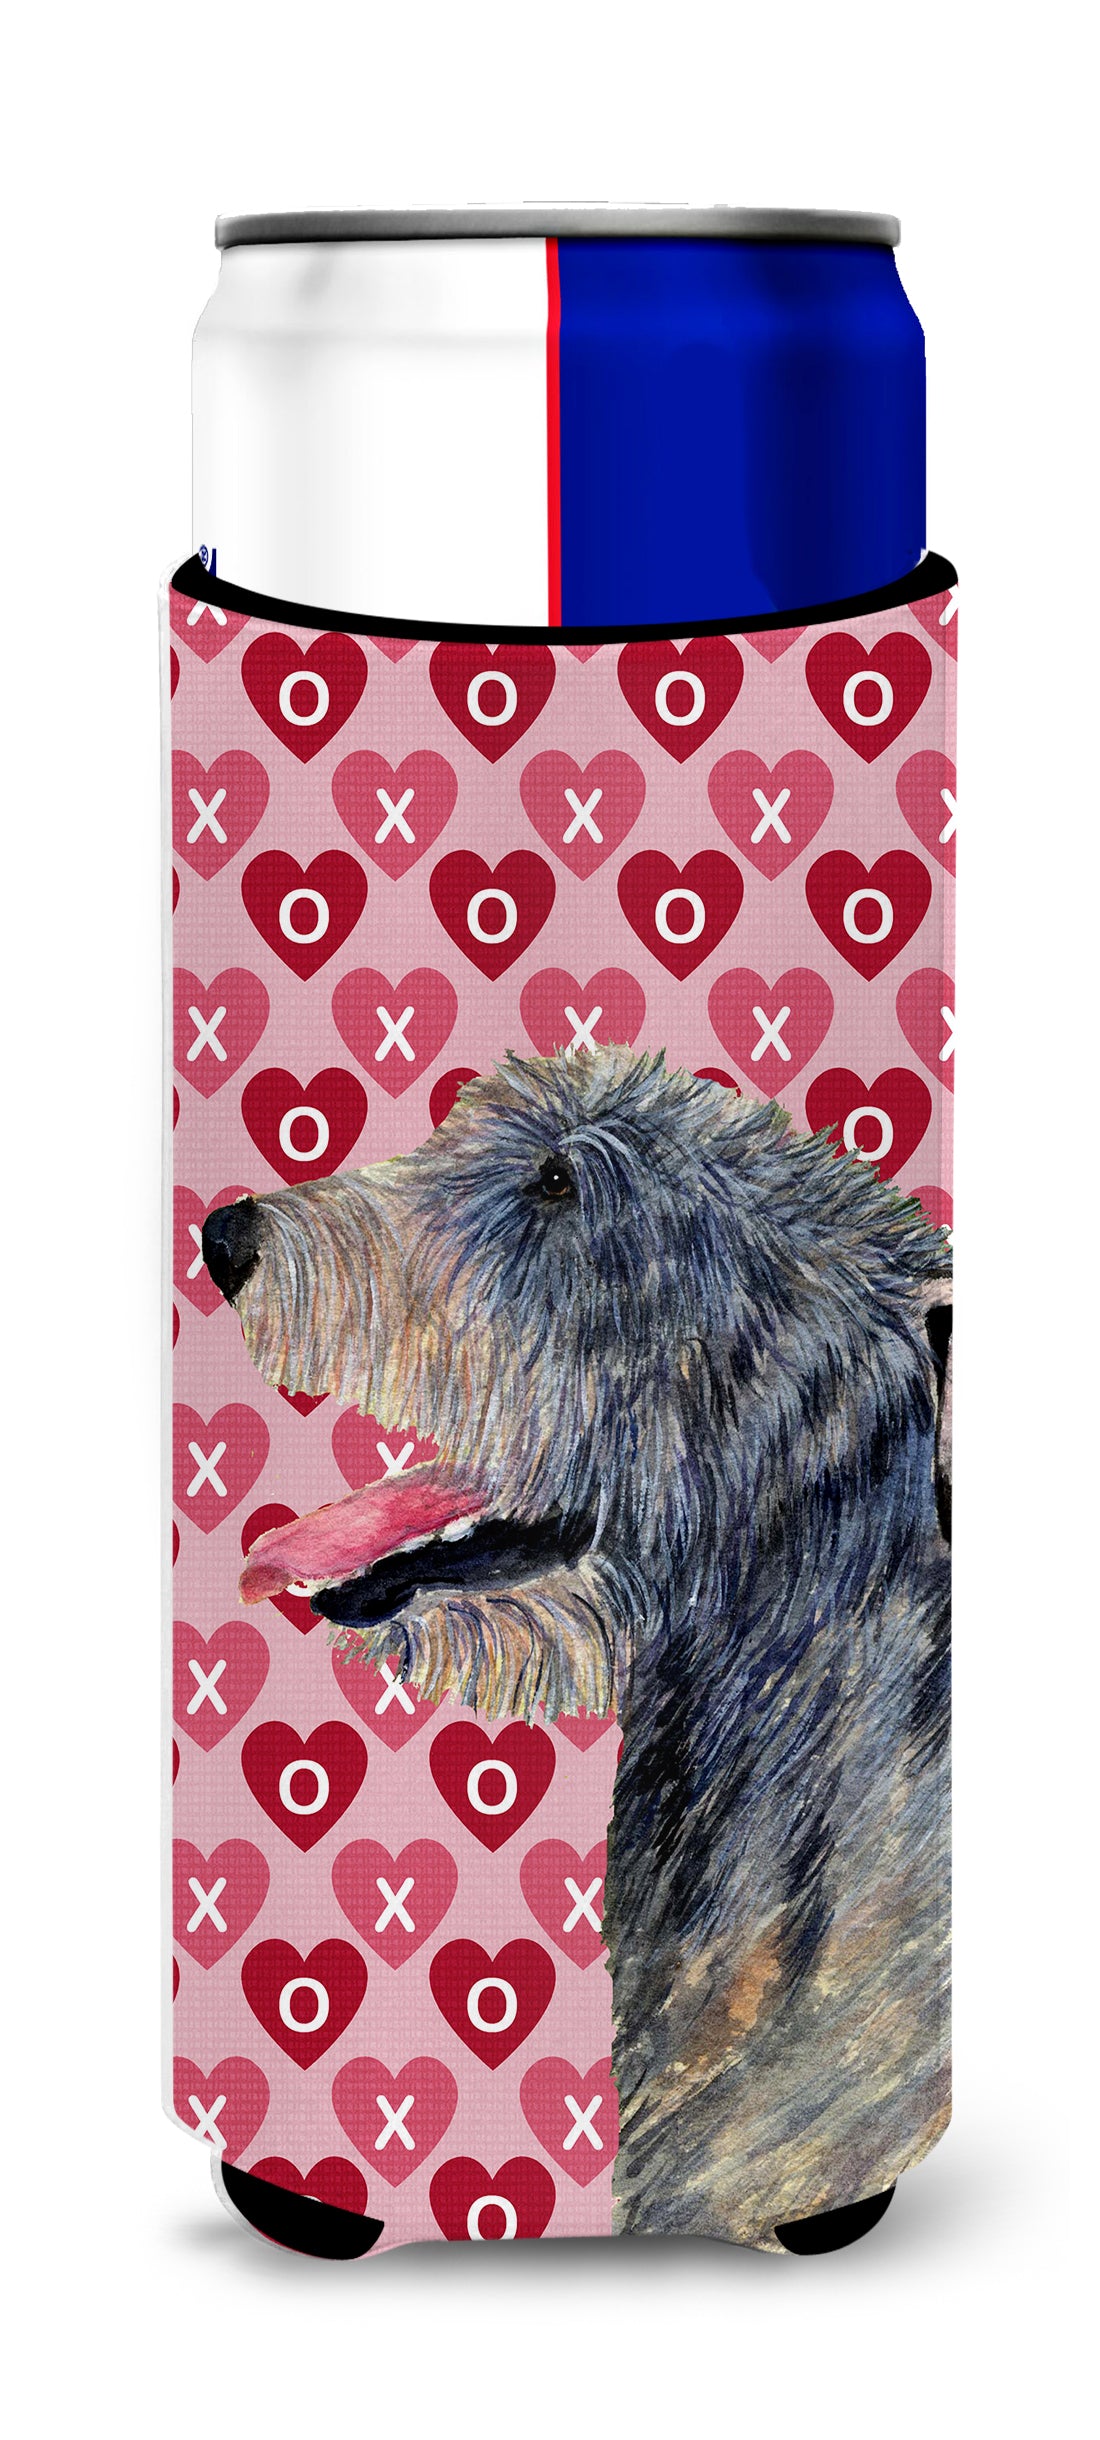 Irish Wolfhound Hearts Love and Valentine's Day Portrait Ultra Beverage Insulators for slim cans SS4506MUK